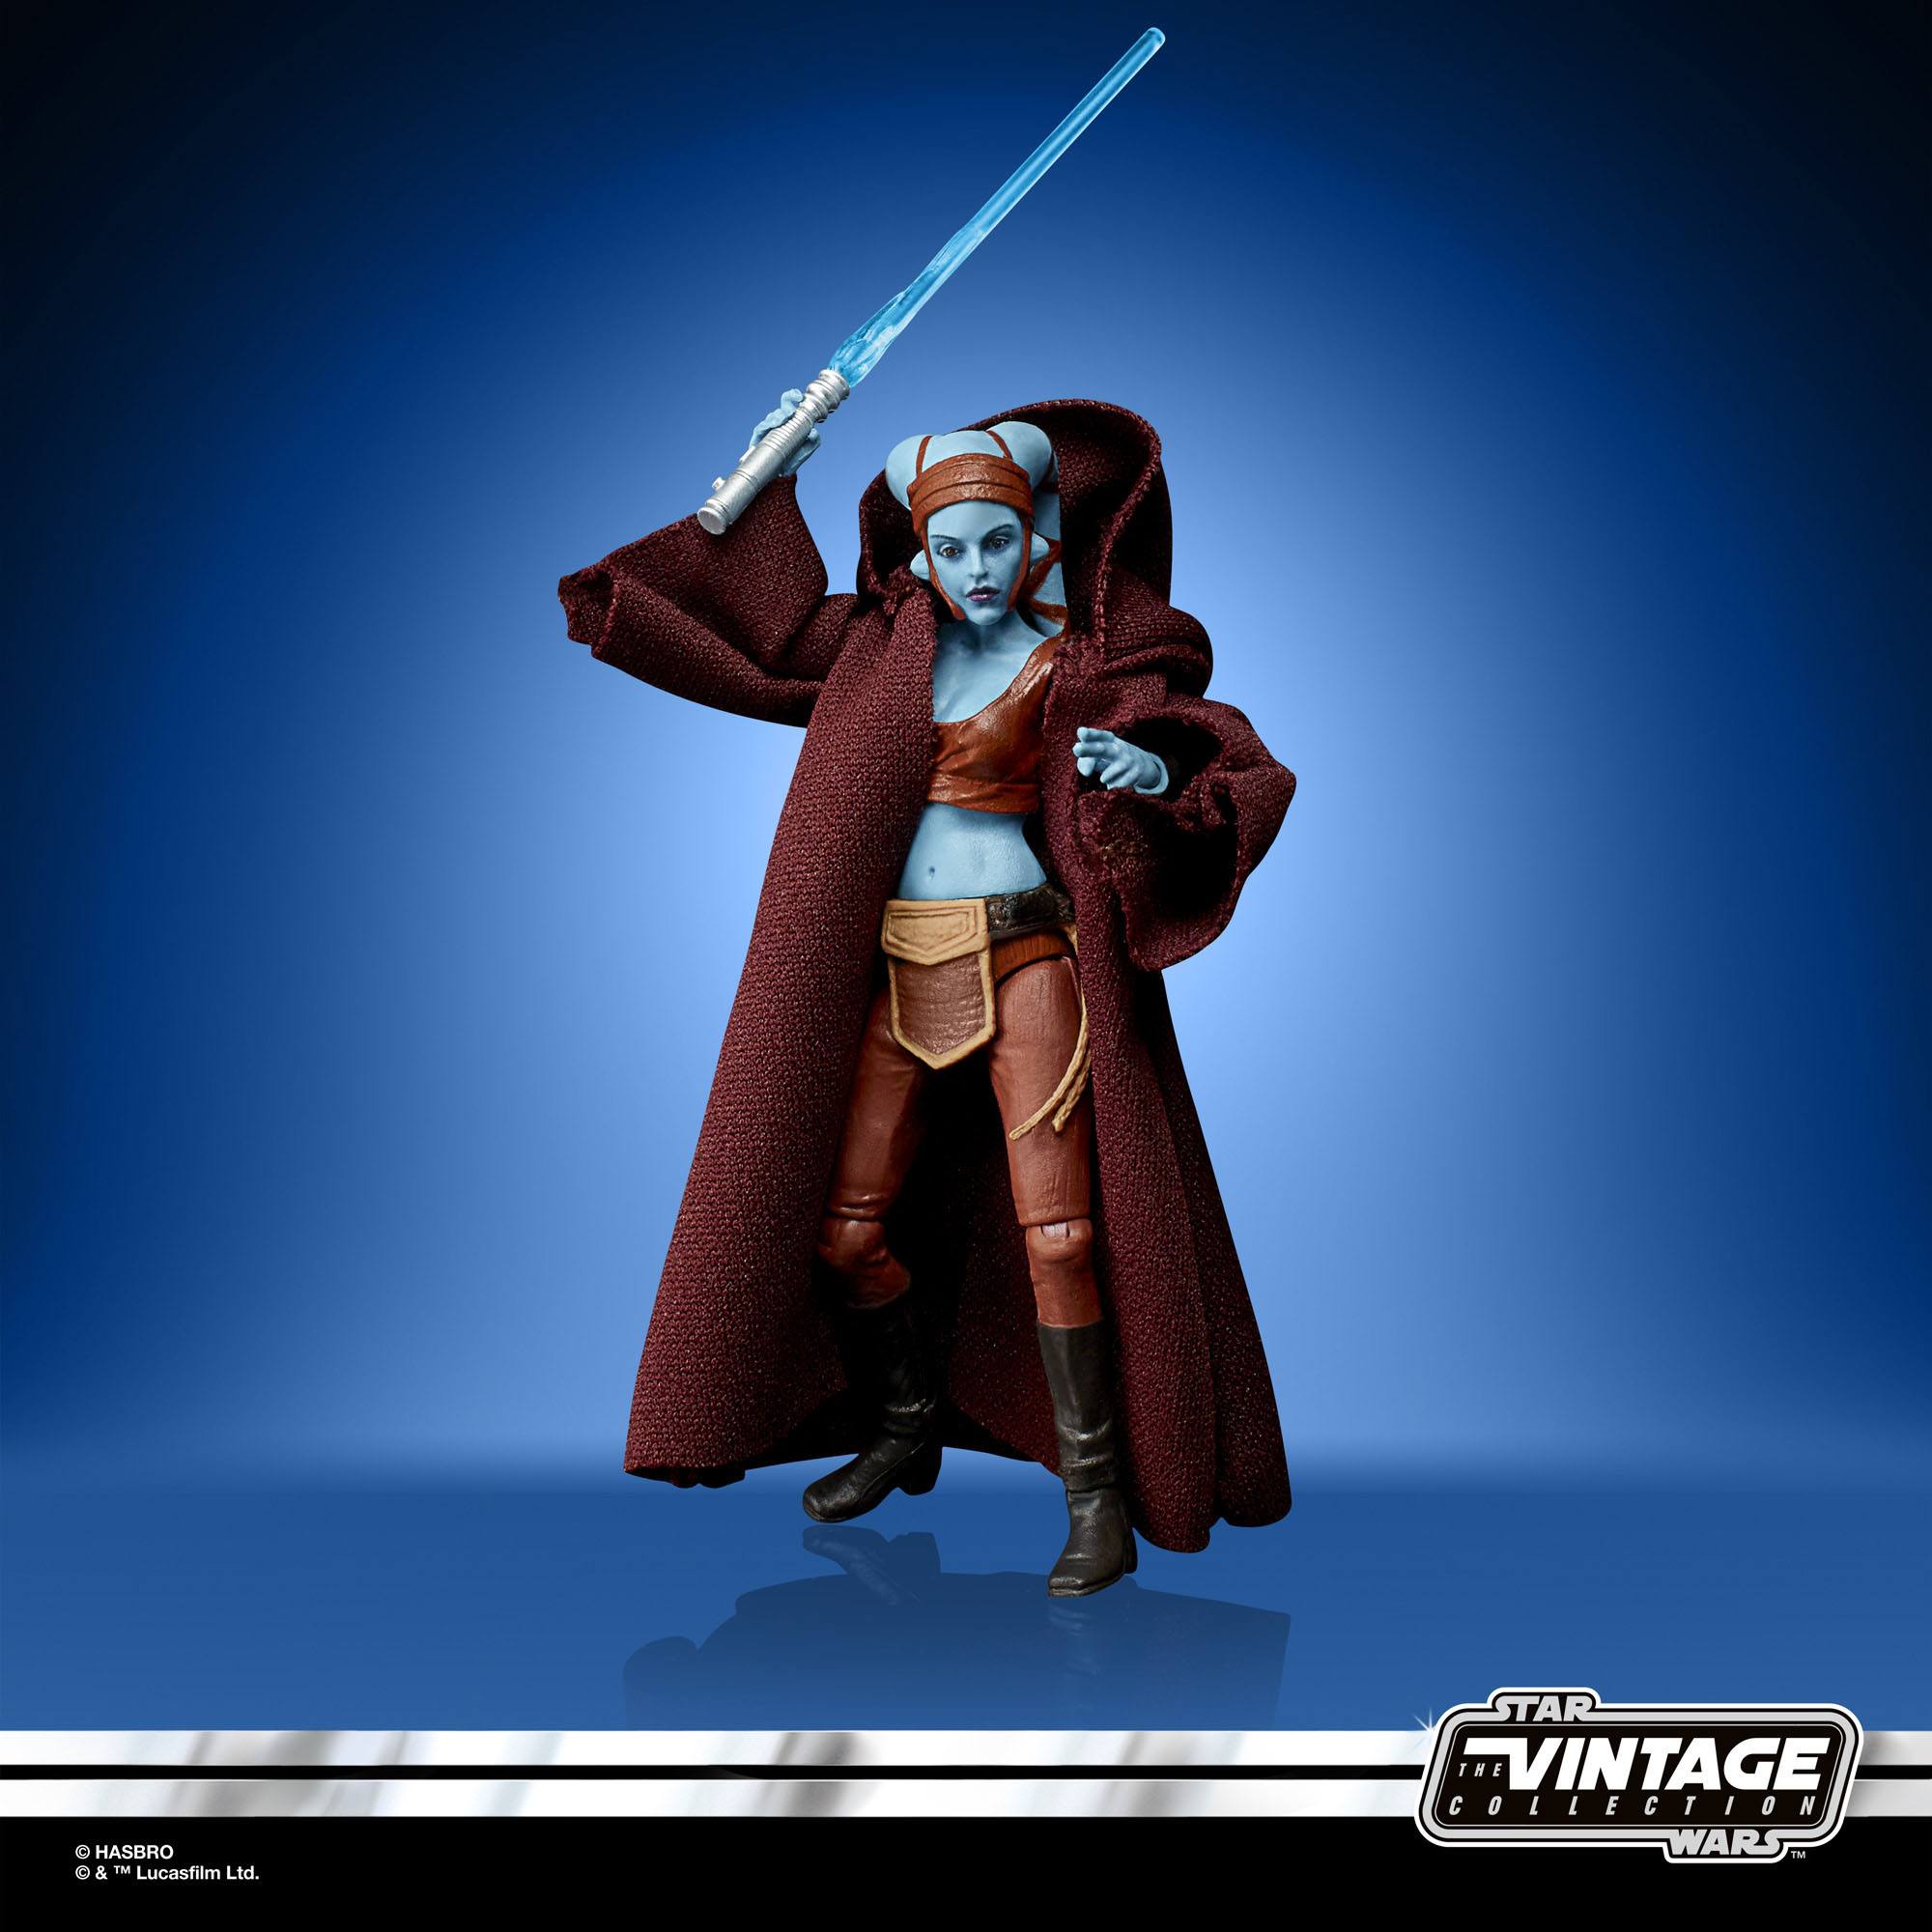 Star Wars The Clone Wars Vintage Collection Actionfigur 2022 Aayla Secura 10 cm F54165L00 5010993980963